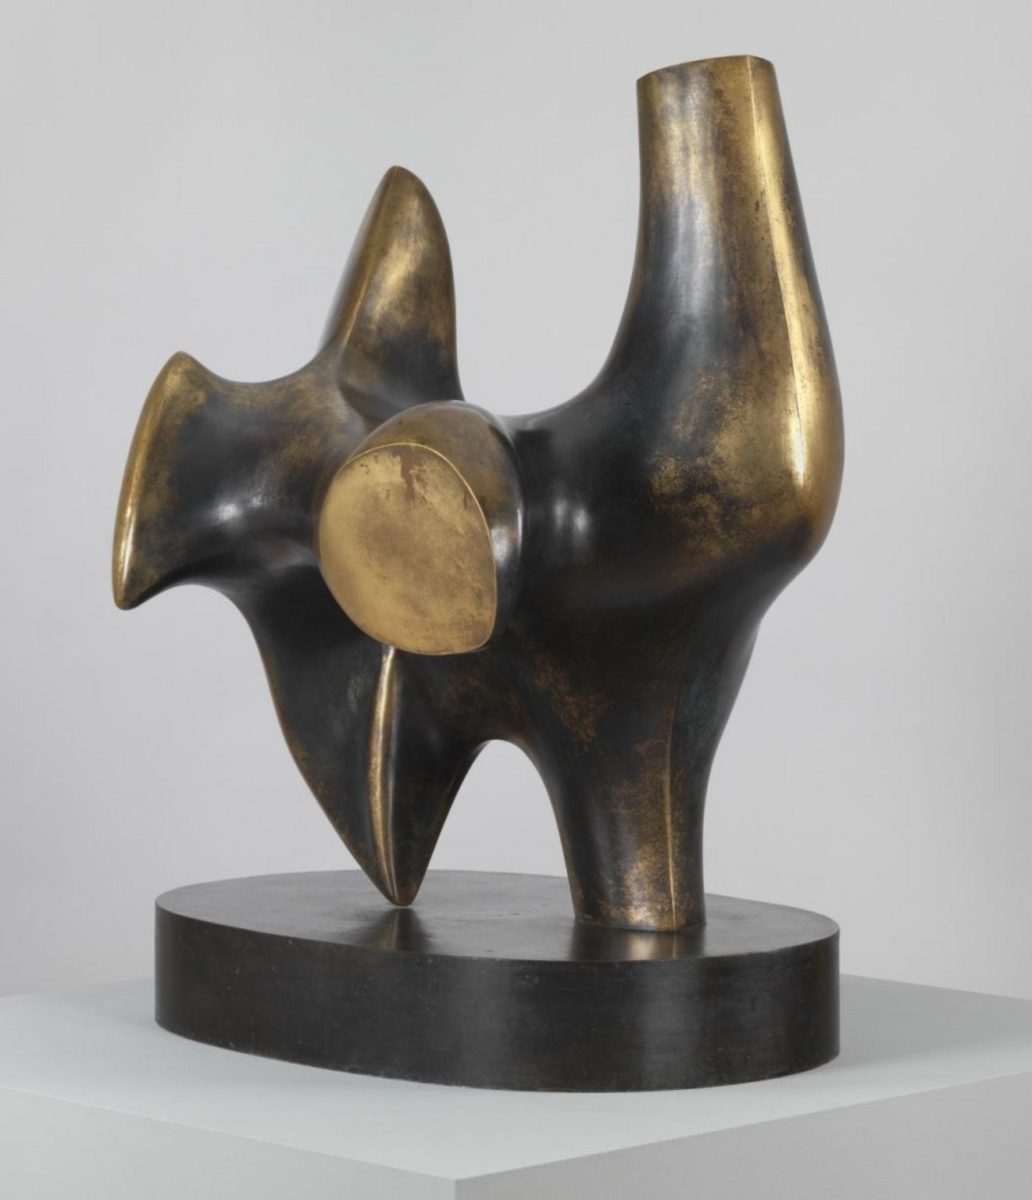 Working Model for Three Way Piece No. 2: Archer, 1964, Henry Moore (via Tate)